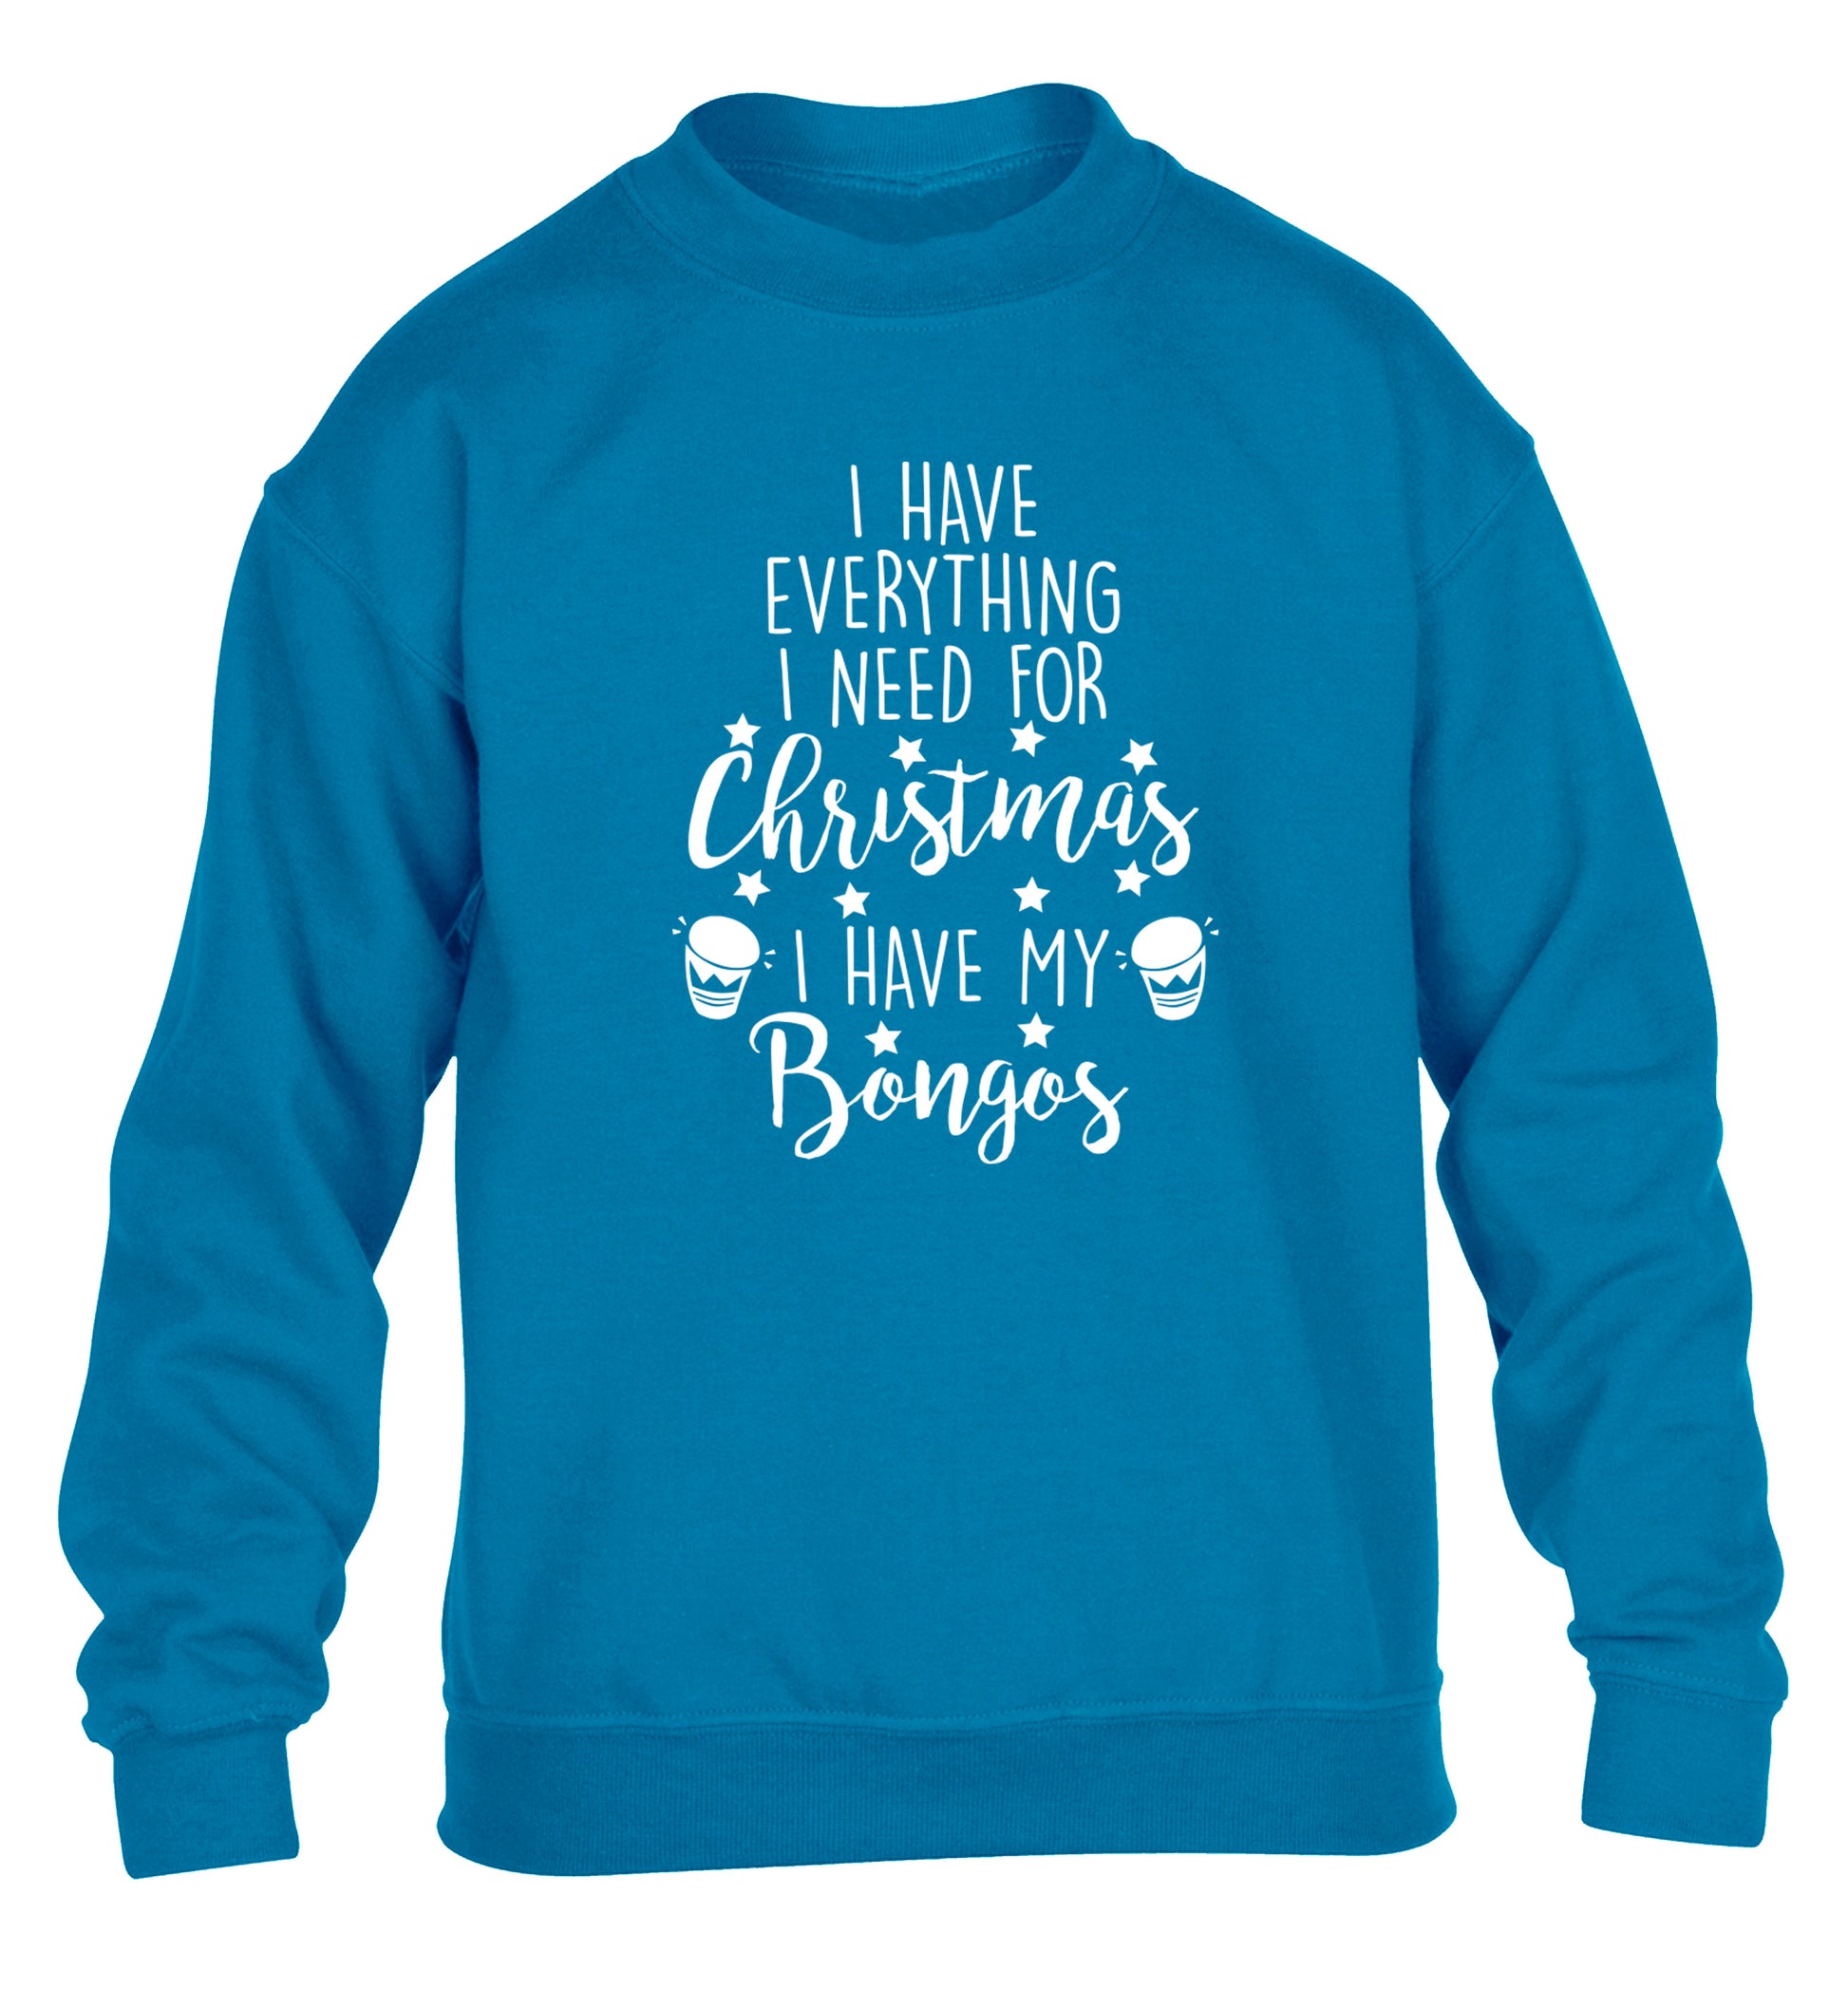 I have everything I need for Christmas I have my bongos! children's blue sweater 12-14 Years